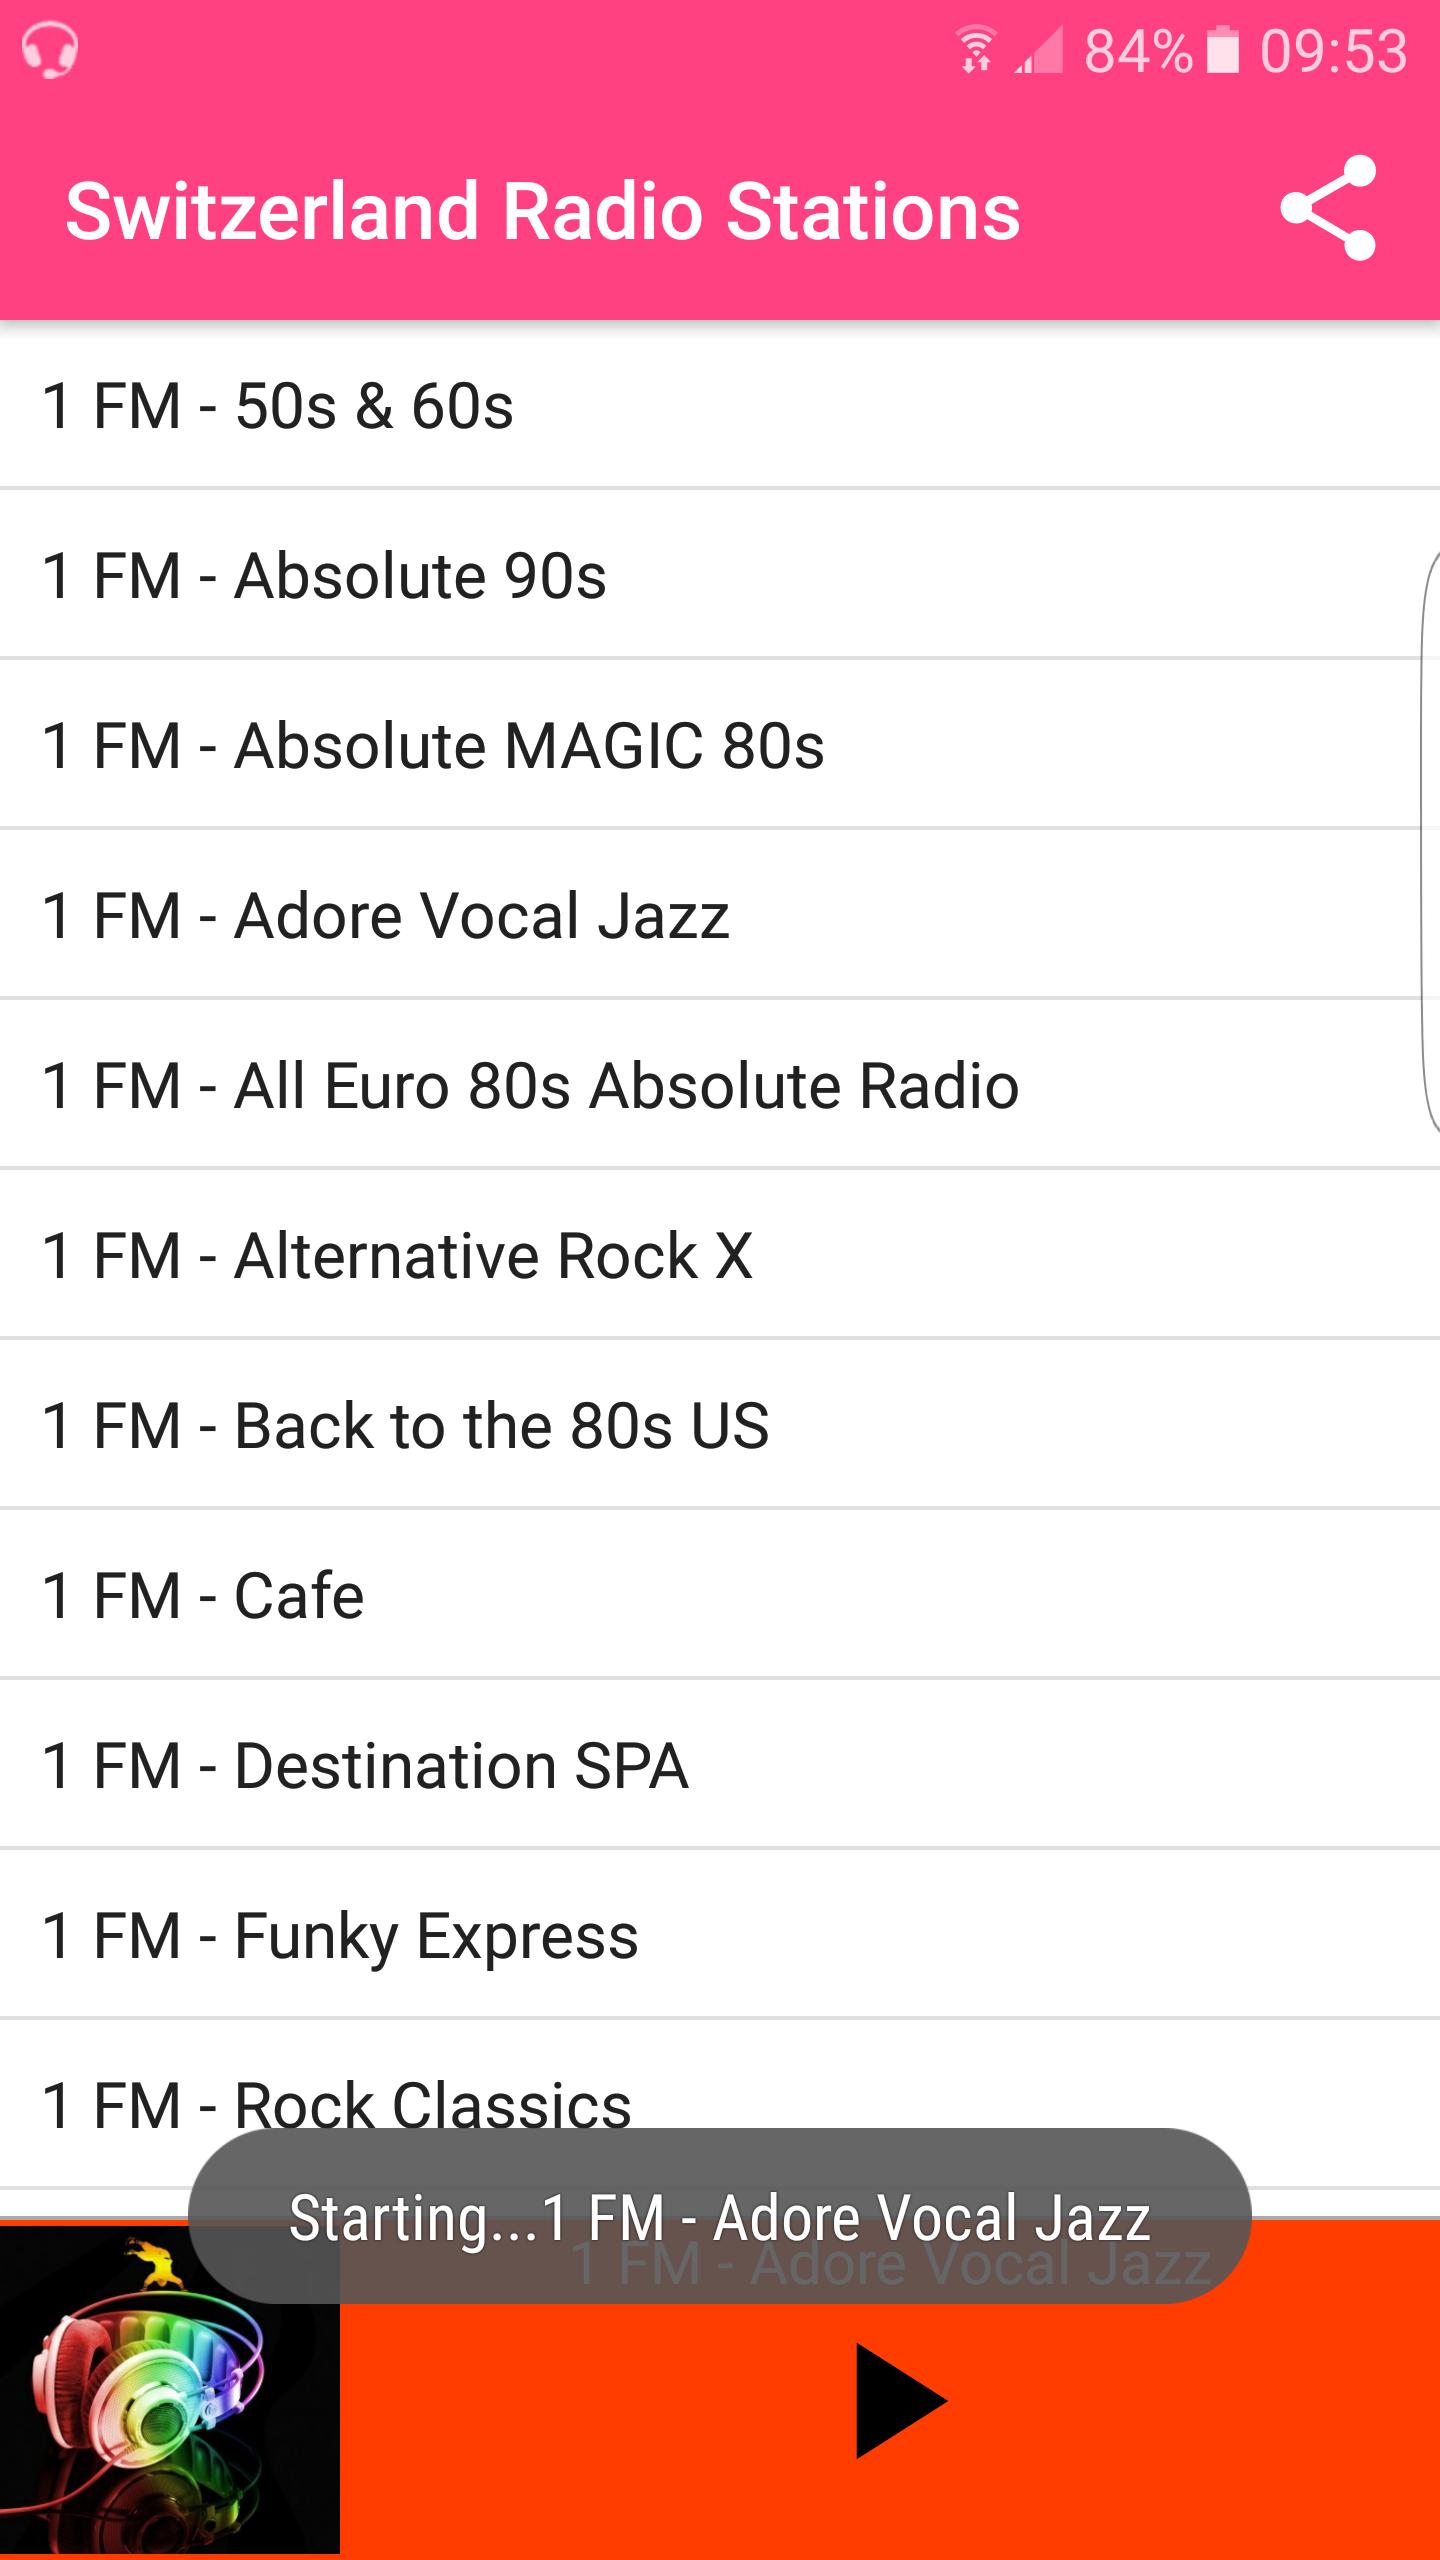 Switzerland Radio Stations for Android - APK Download